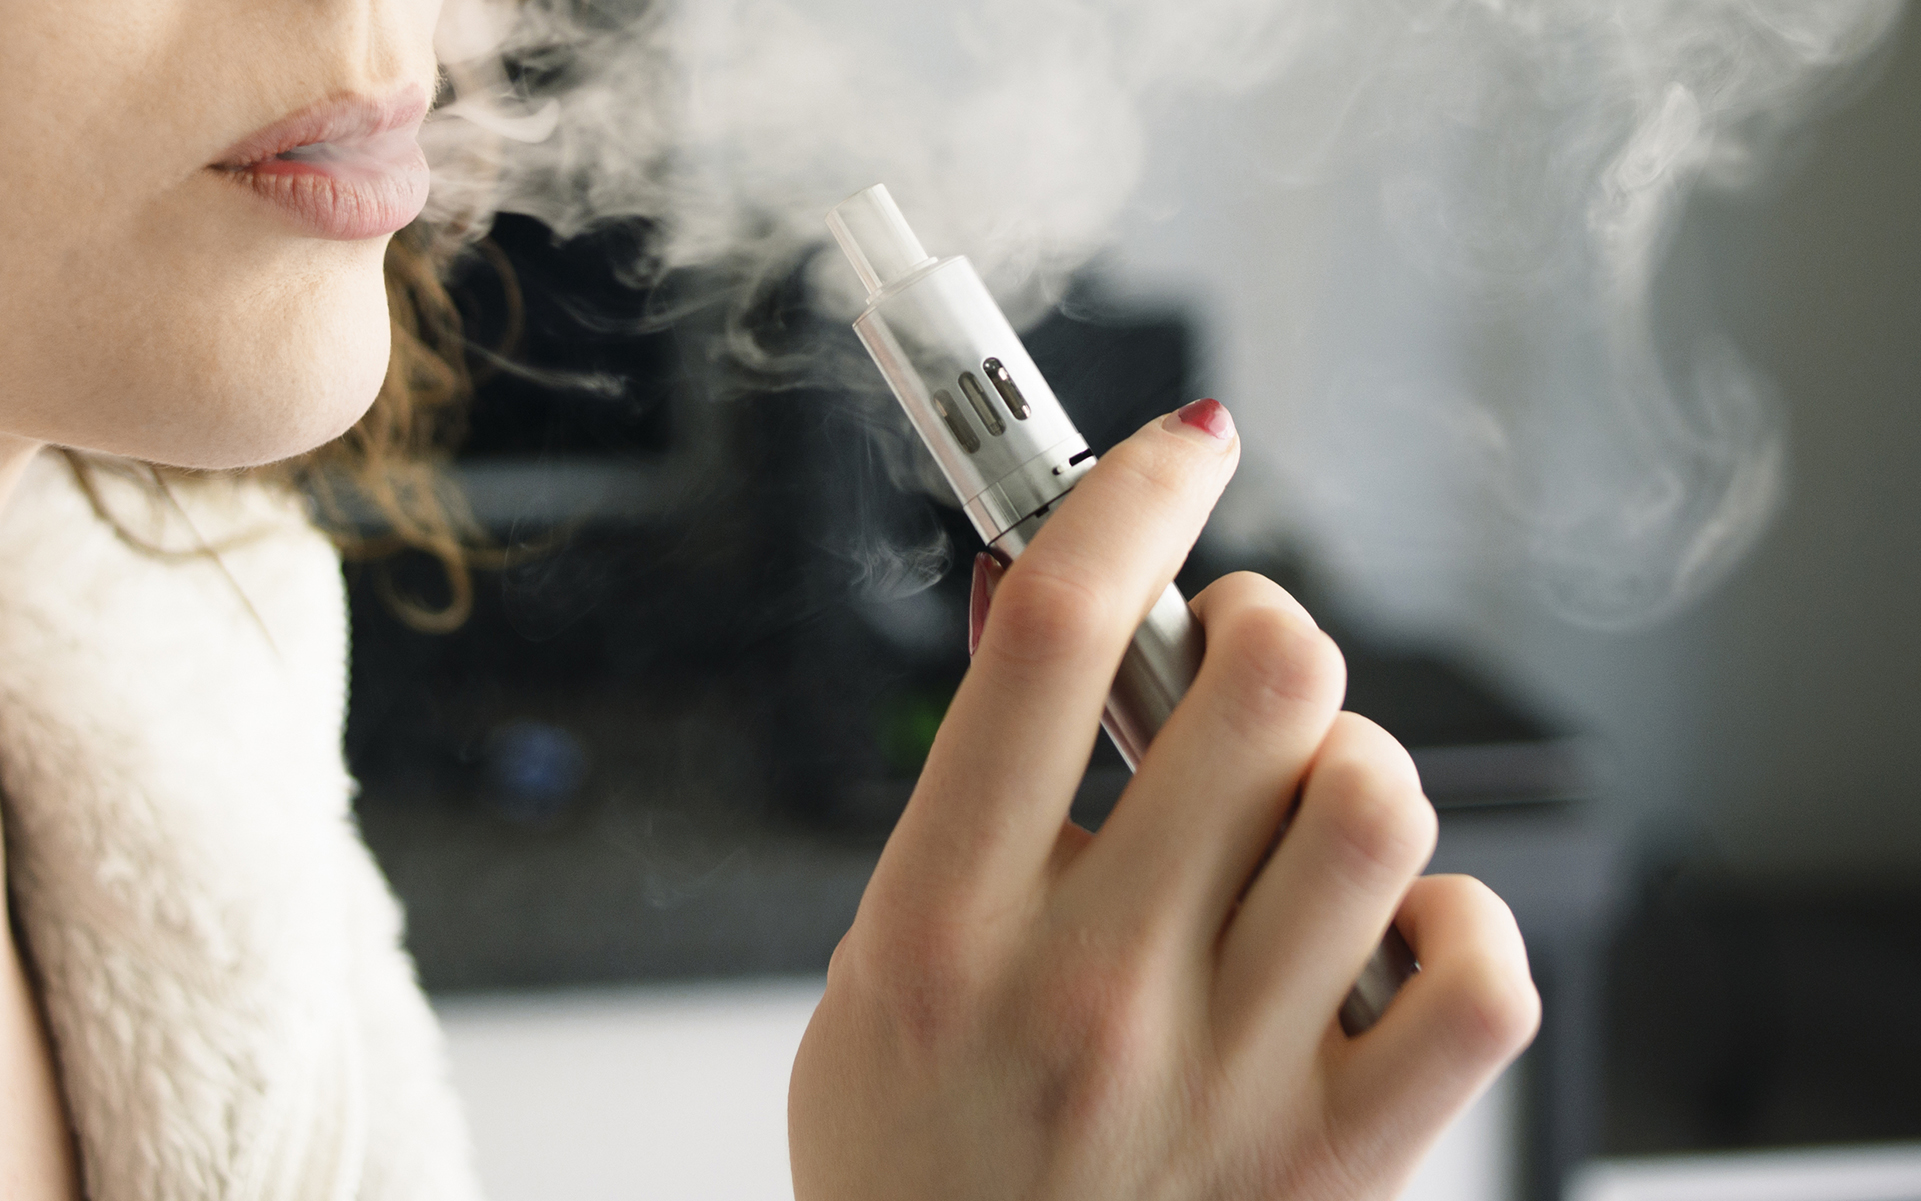 10 Questions Answered About Vaping CBD Oil - Vaping360